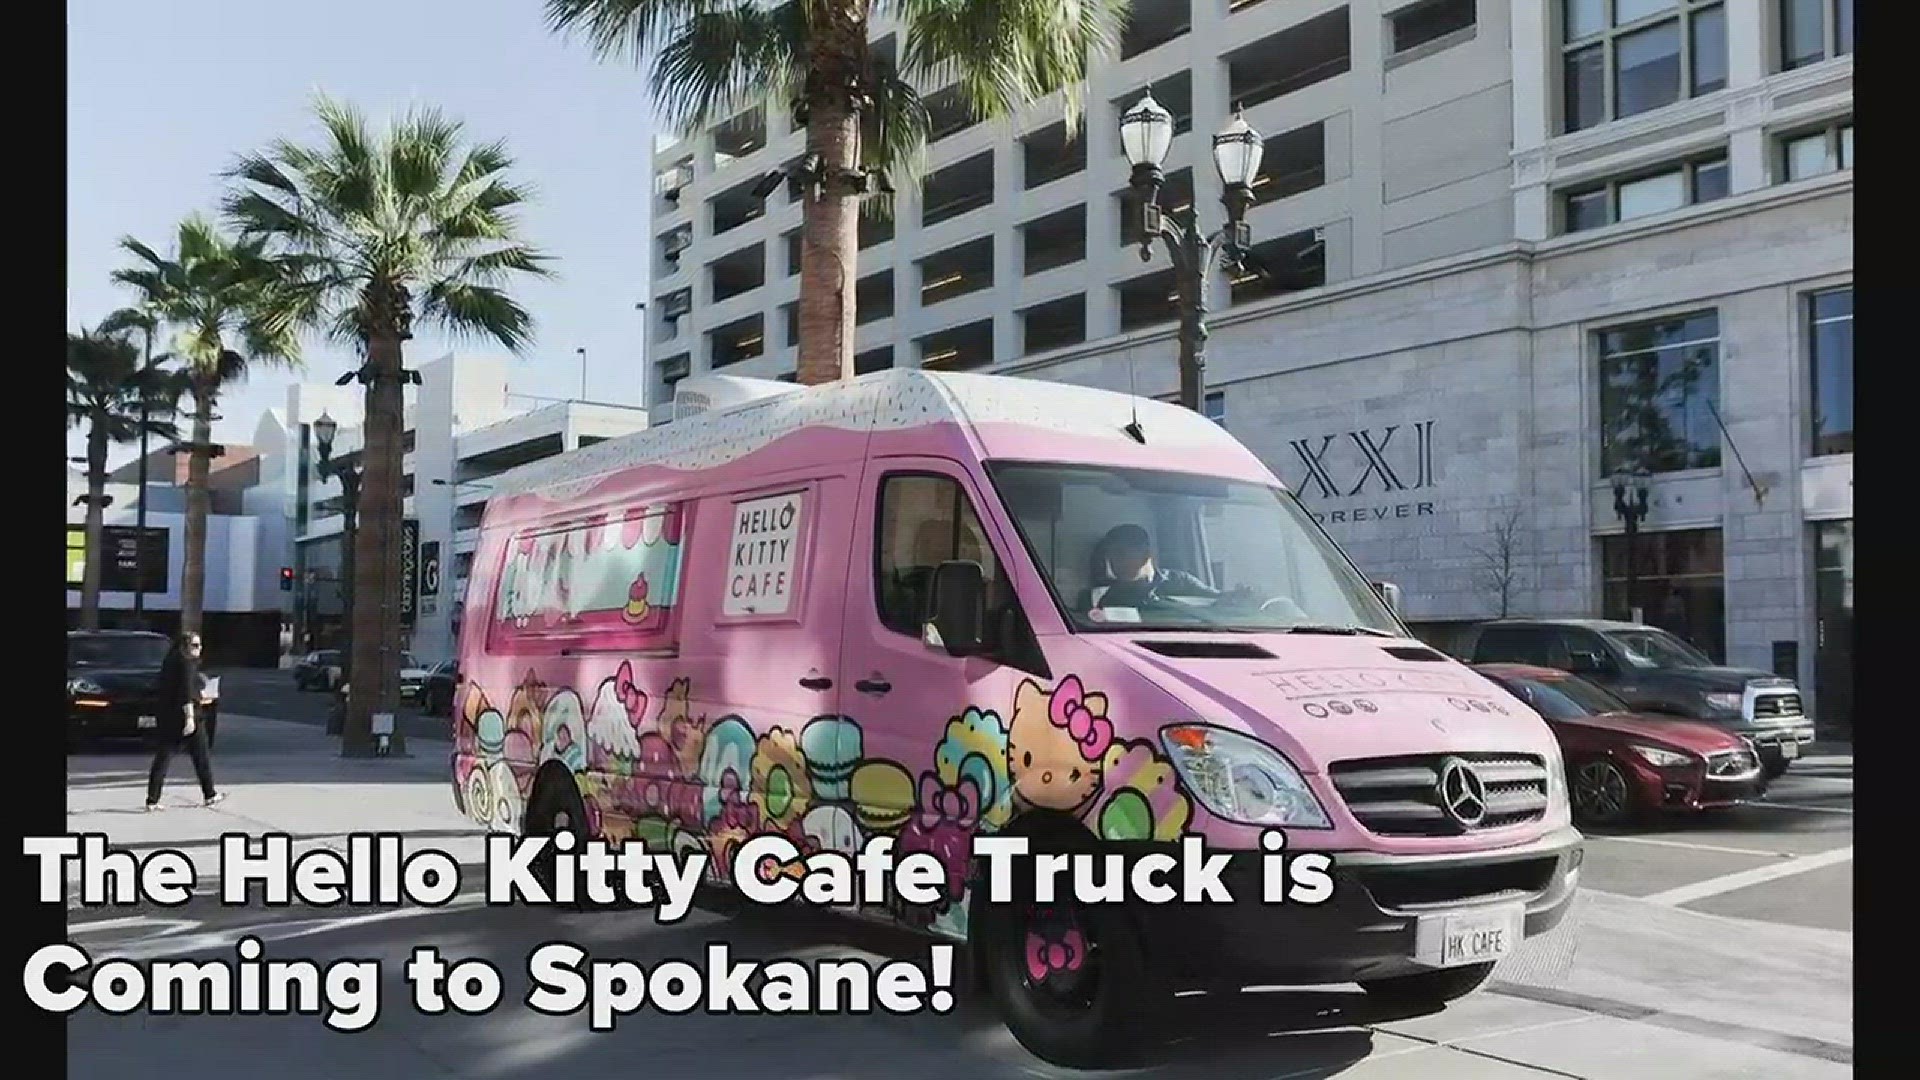 The Hello Kitty Caf� Truck is visiting Spokane on Saturday, April 21. This is the truck's first visit to the Lilac City.